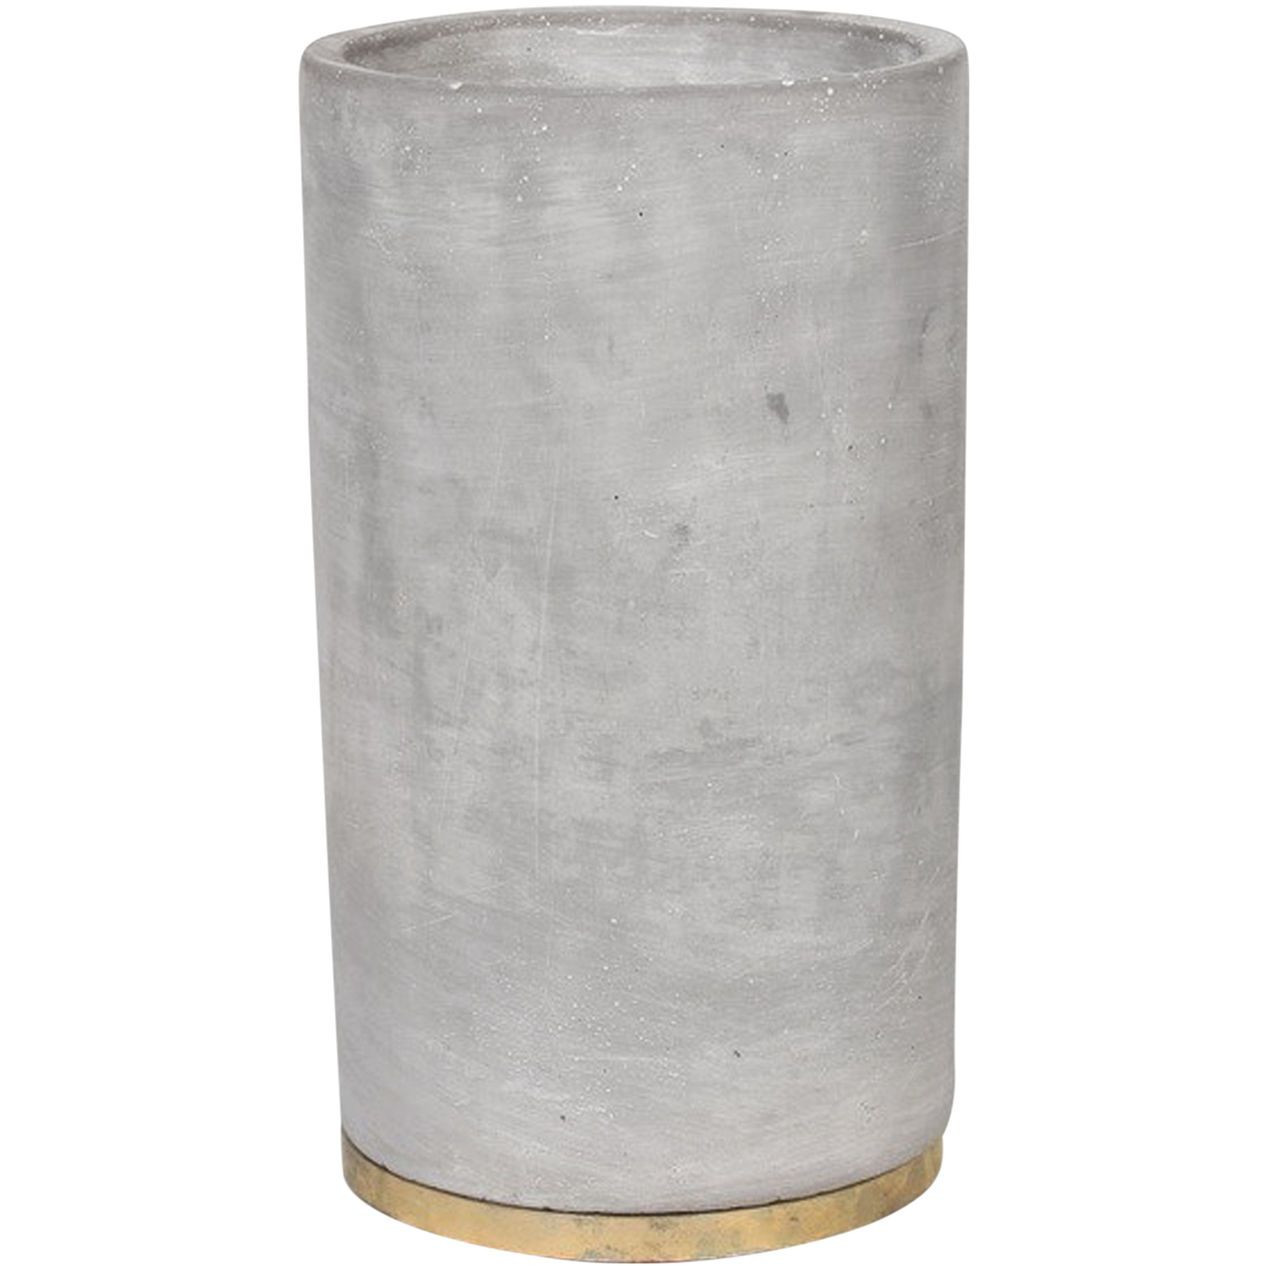 28 Awesome Floor Vase Umbrella Stand 2024 free download floor vase umbrella stand of gold rim vase cement planter 4 5 x 8 in at home at home for inside gold rim vase cement planter 4 5 x 8 in at home at home